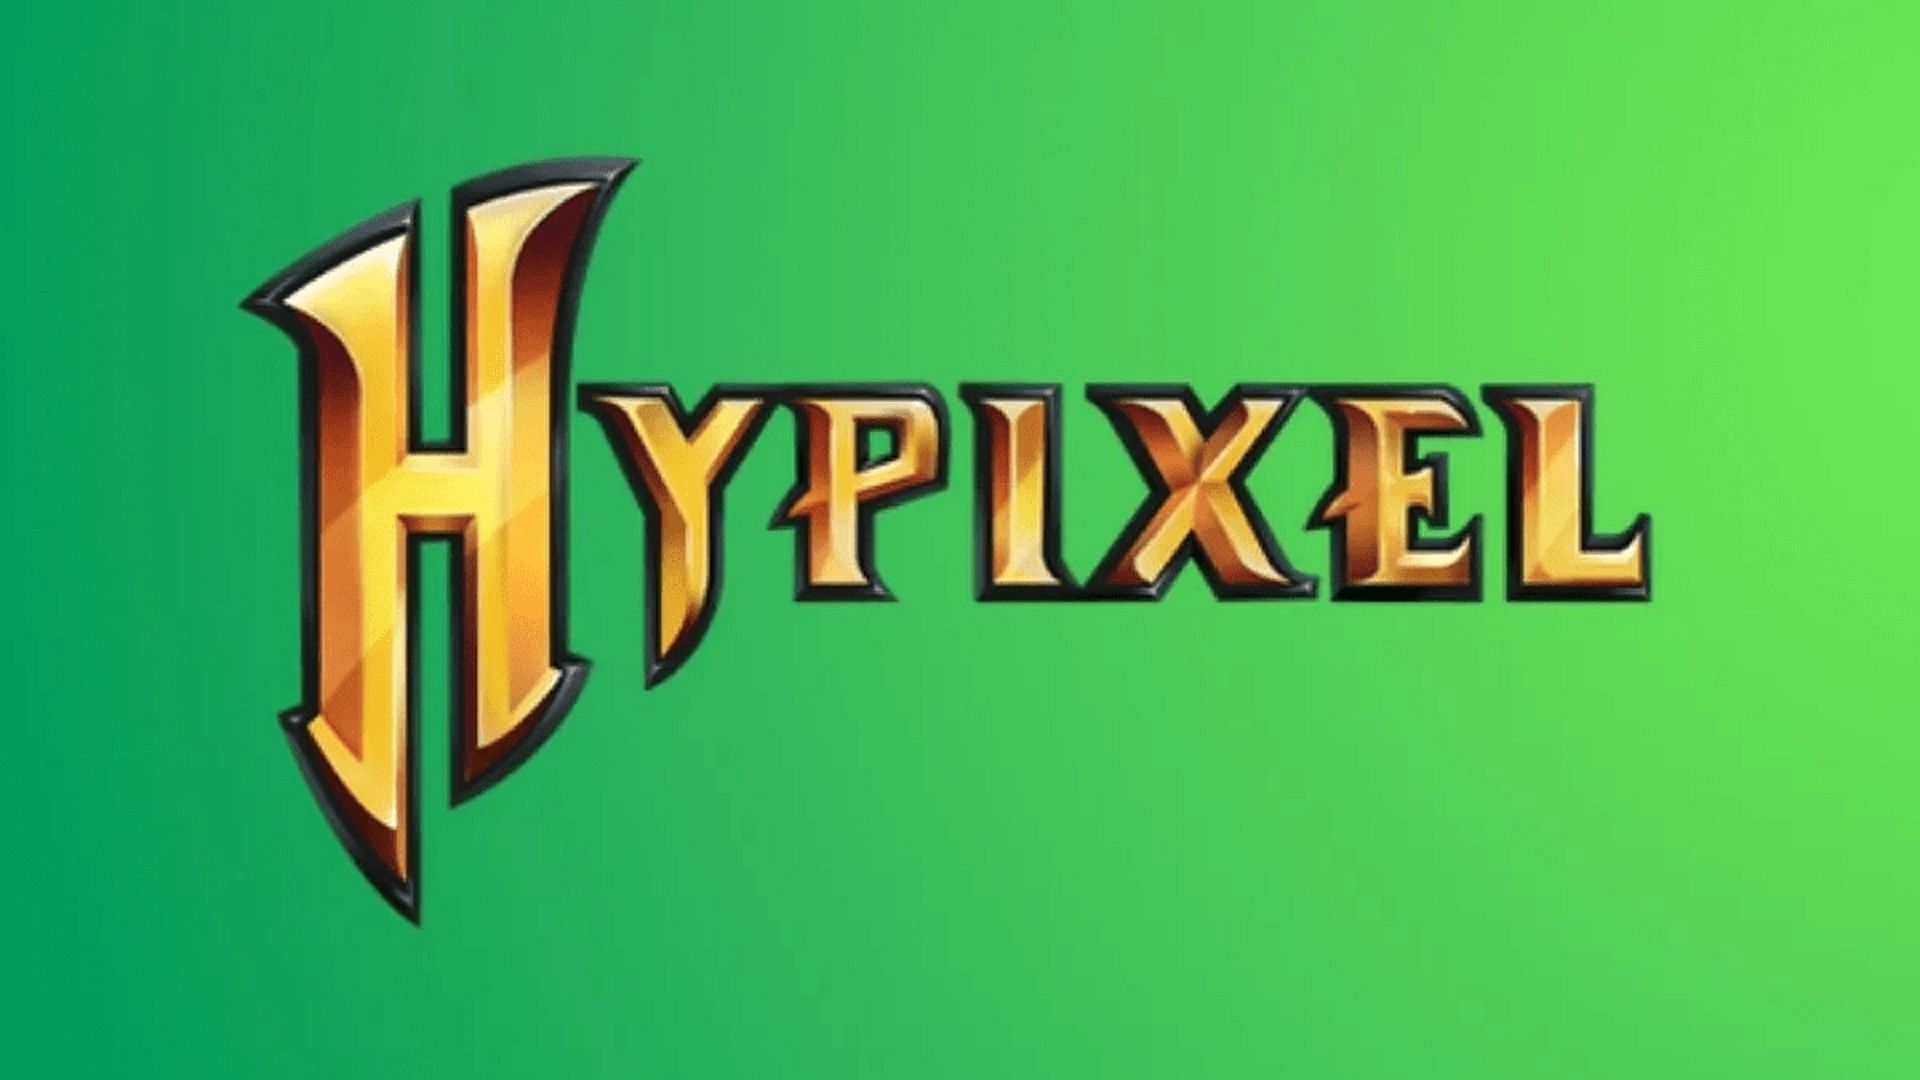 Hypixel&#039;s popularity is cemented among the Minecraft community (Image via Hypixel.net)